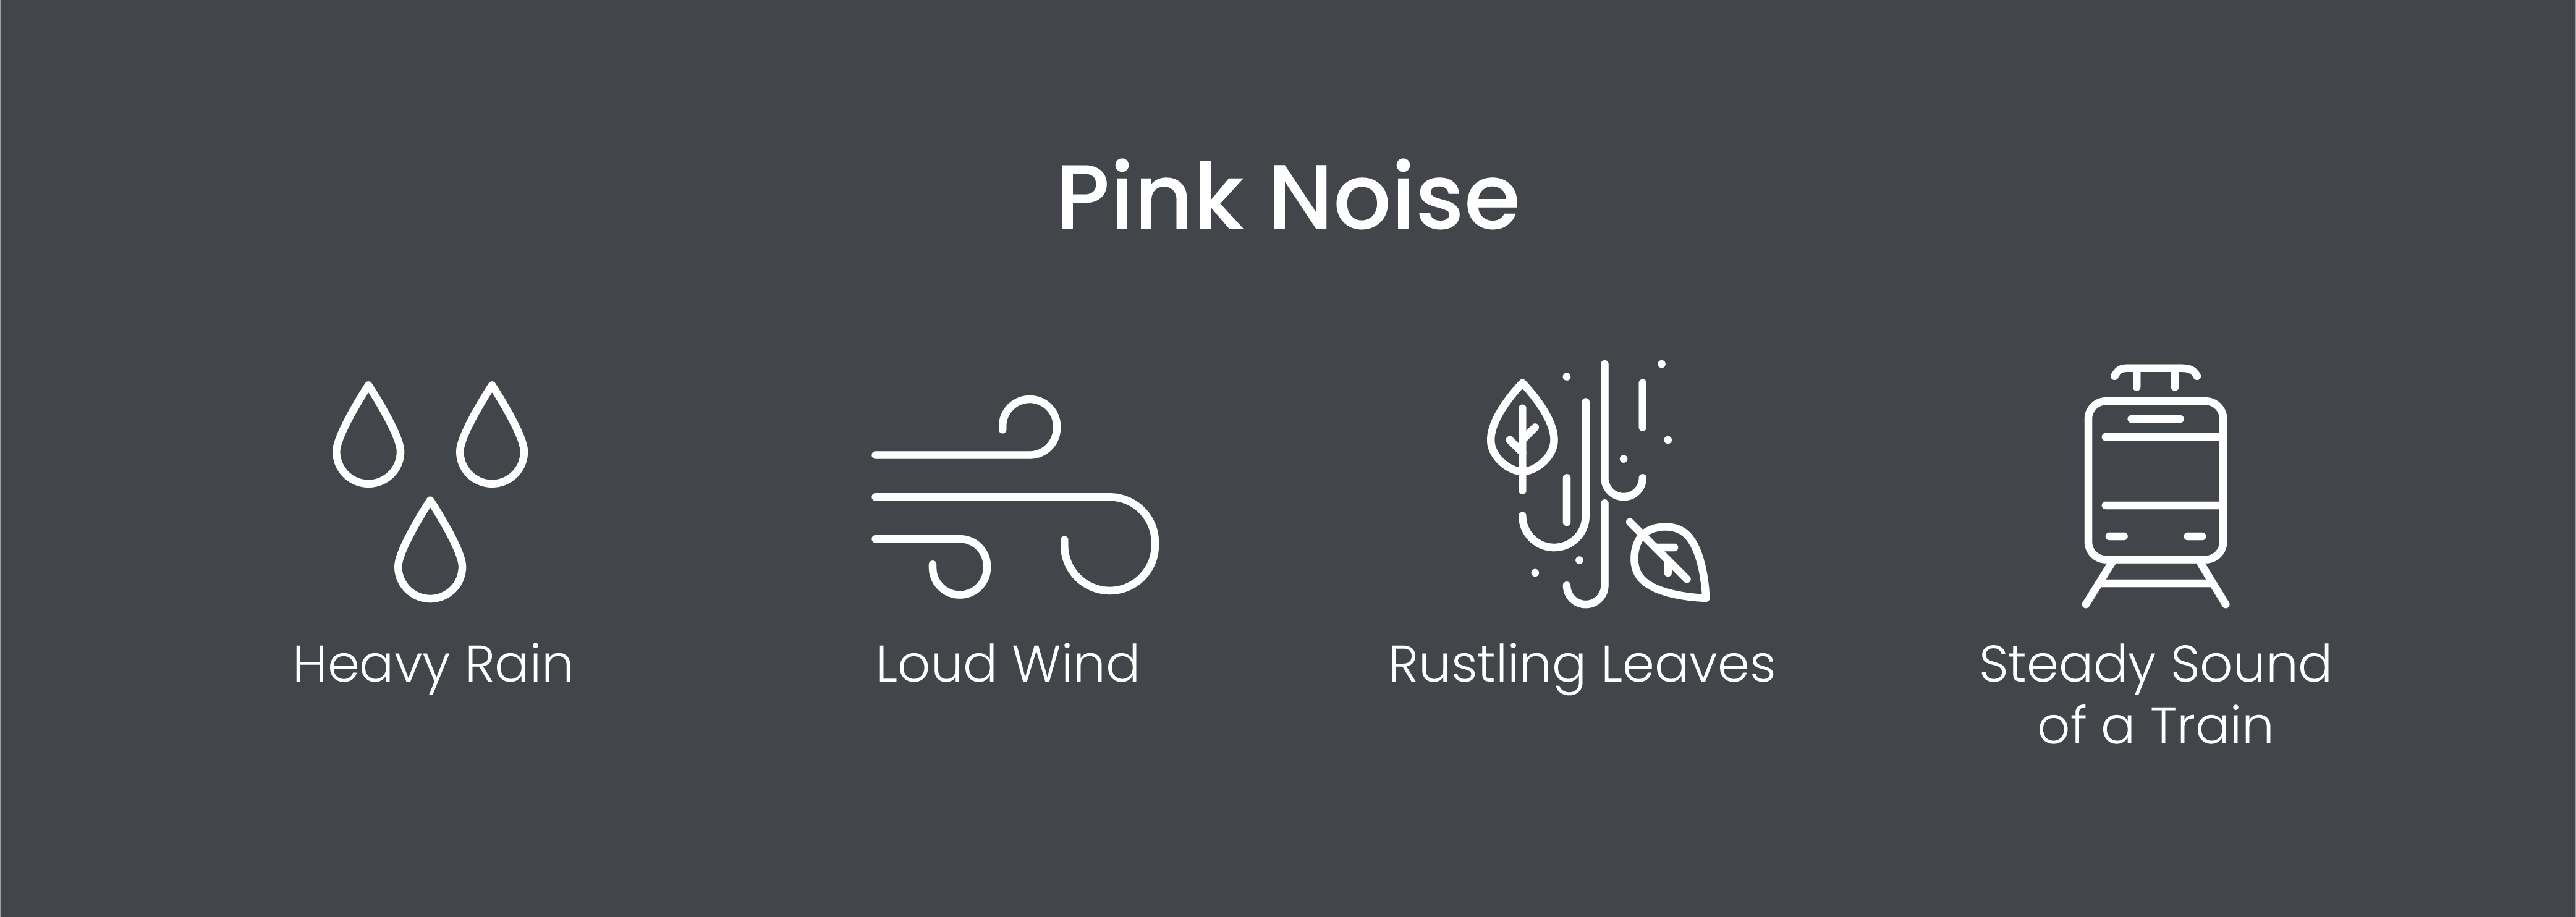 Examples of pink noise